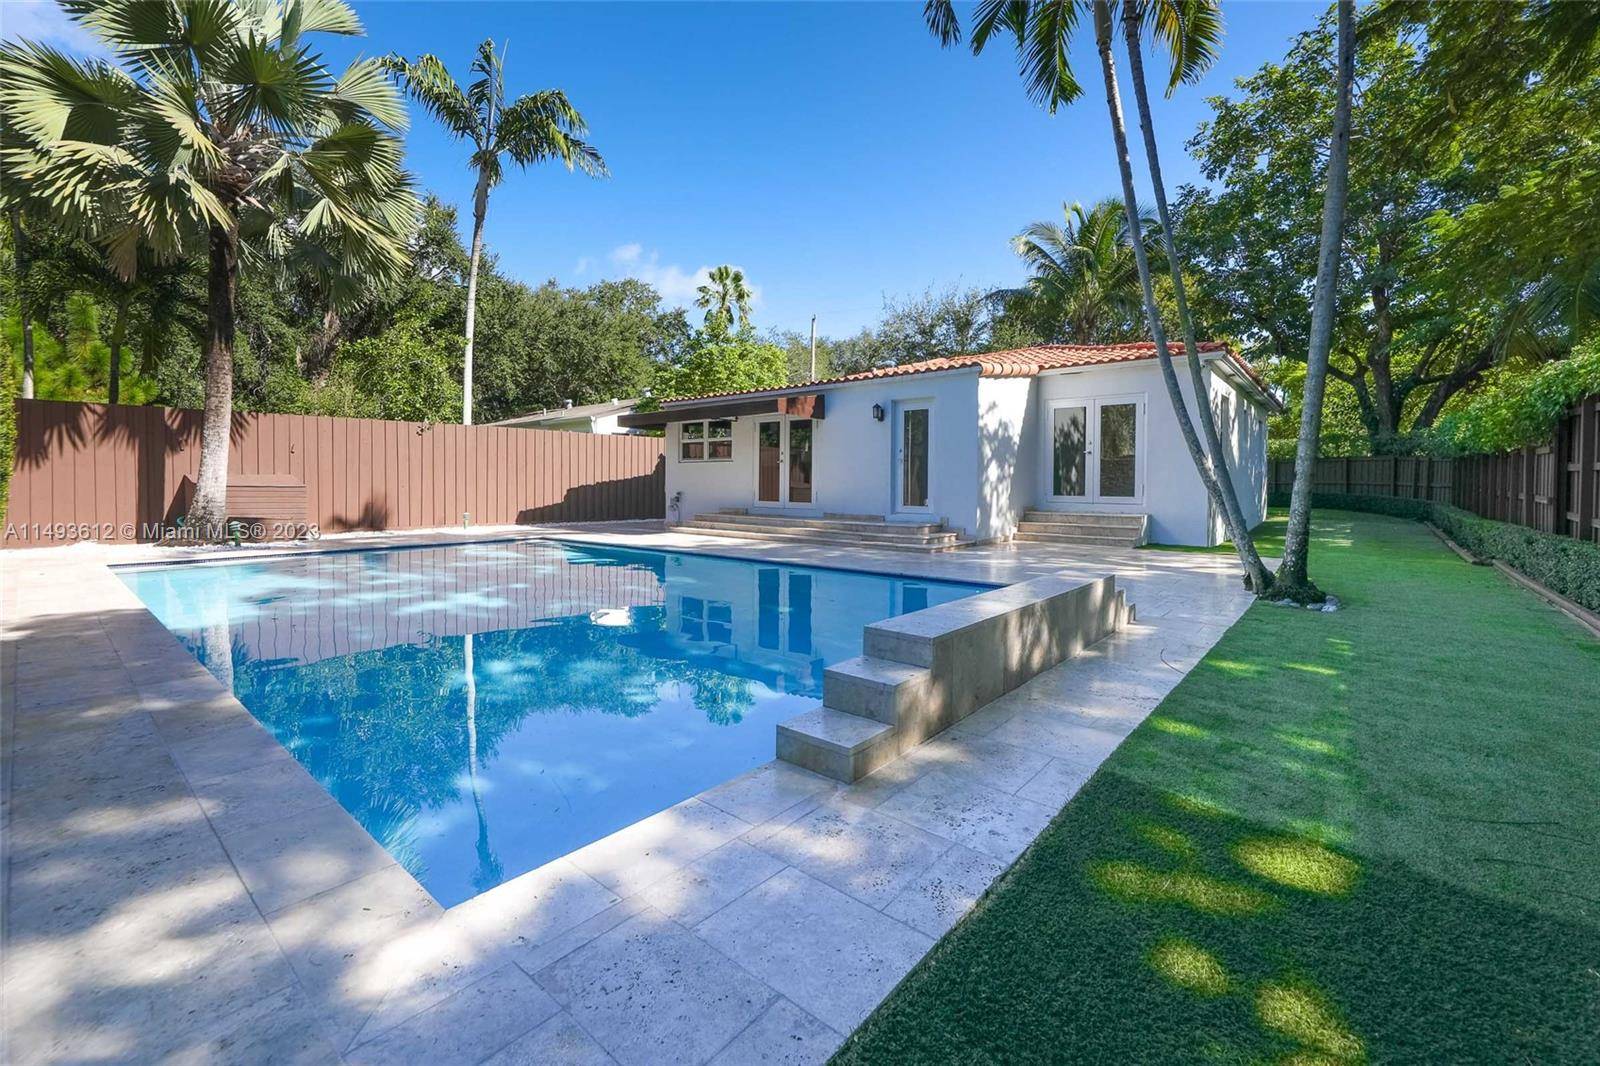 Indulge in the epitome of upscale living with this meticulously designed single family residence in North Coconut Grove.